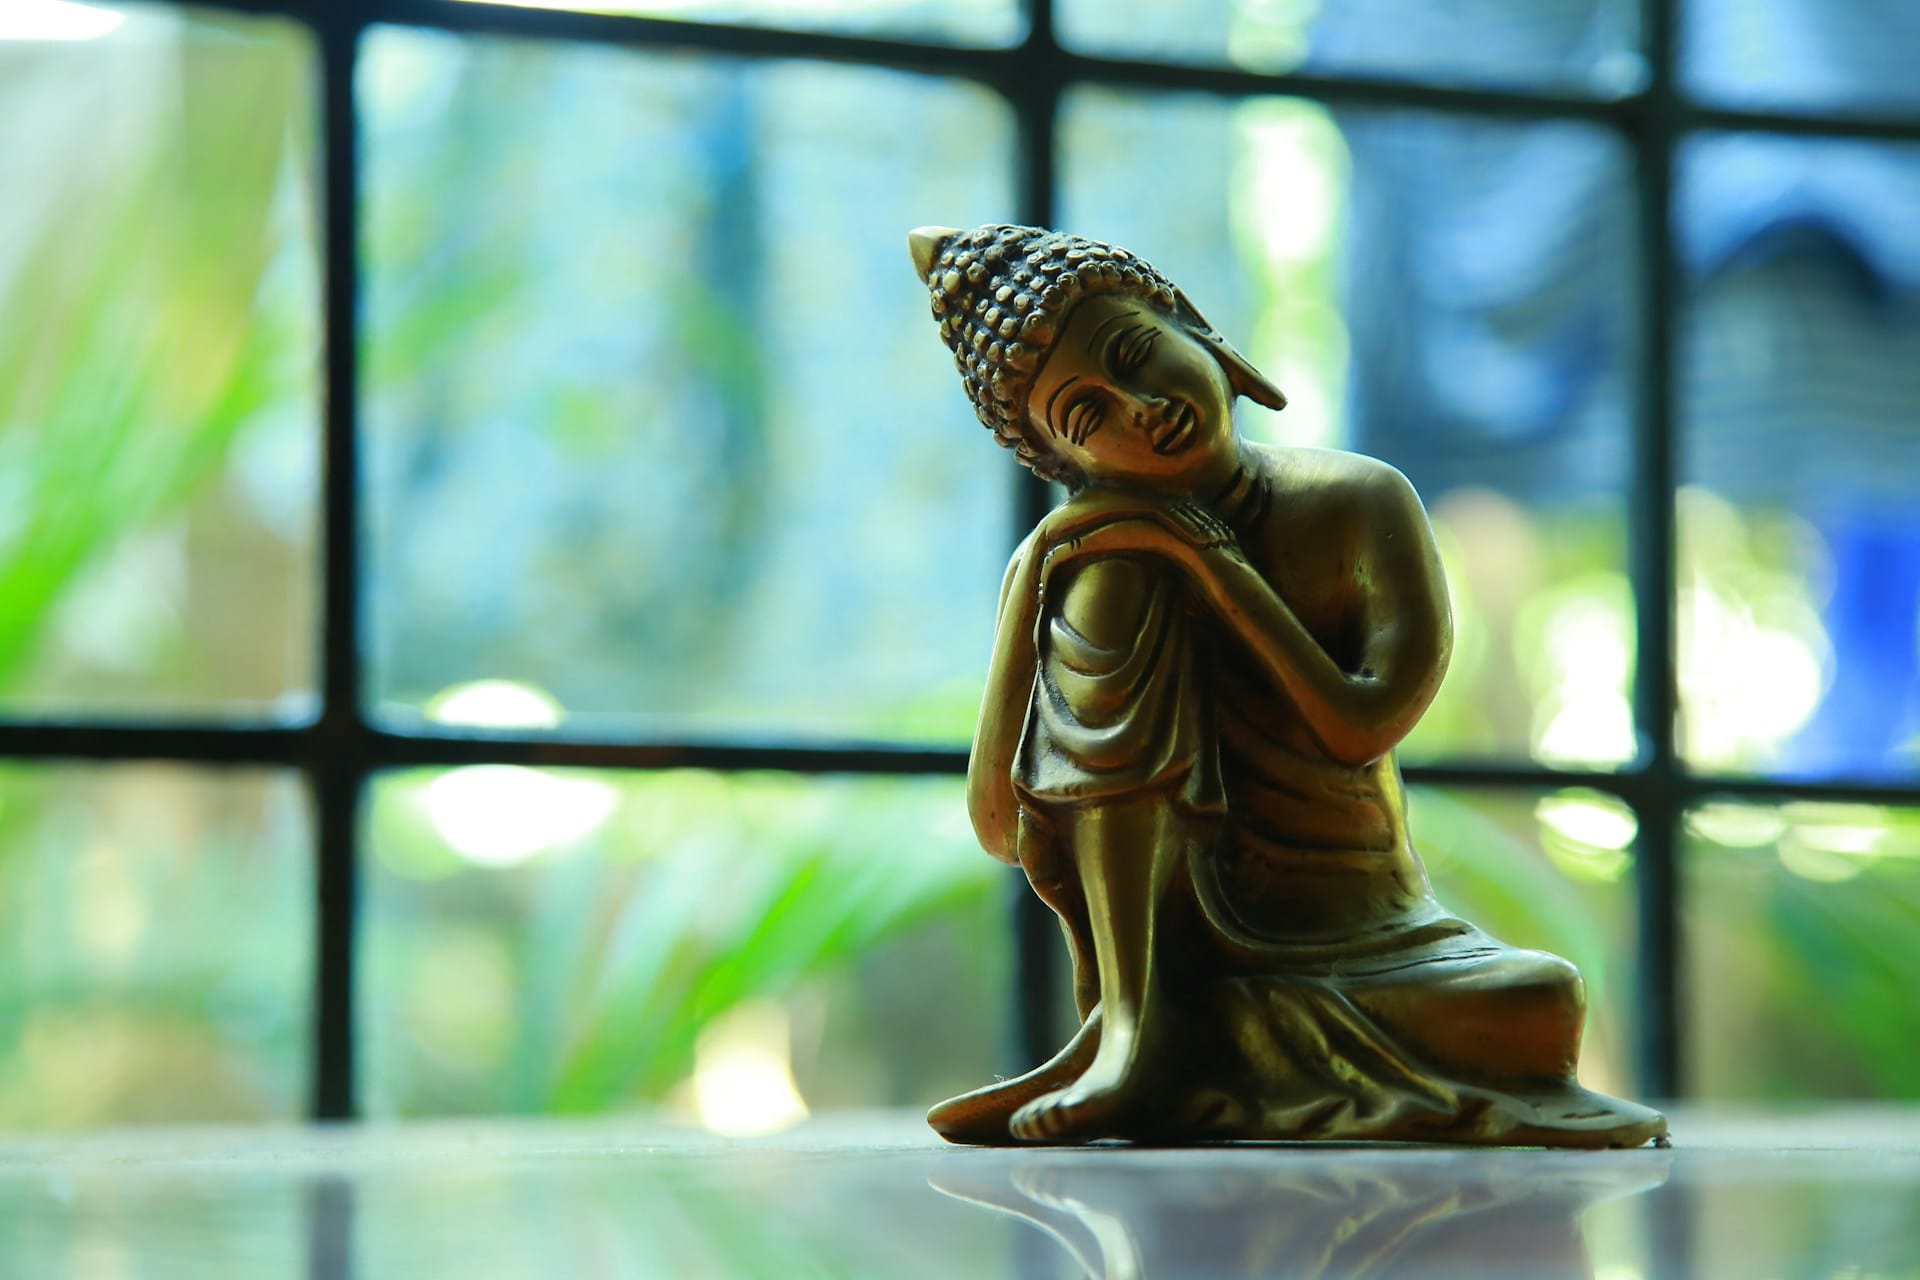 statue of a Buddha resting his head on his knee against a blurred backdrop of a window overlooking a garden